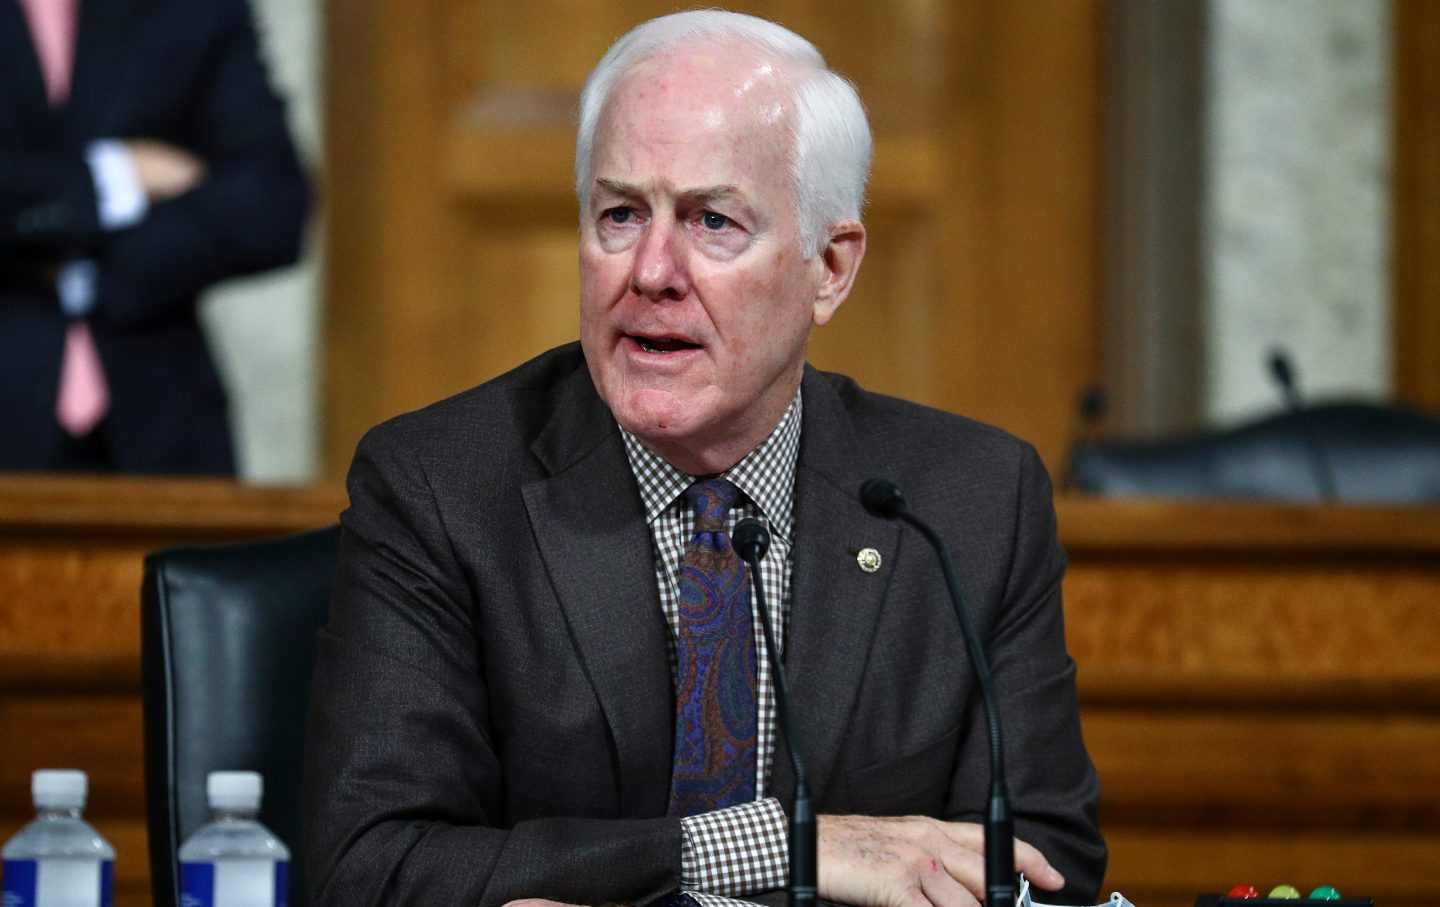 John Cornyn in front of a small microphone.